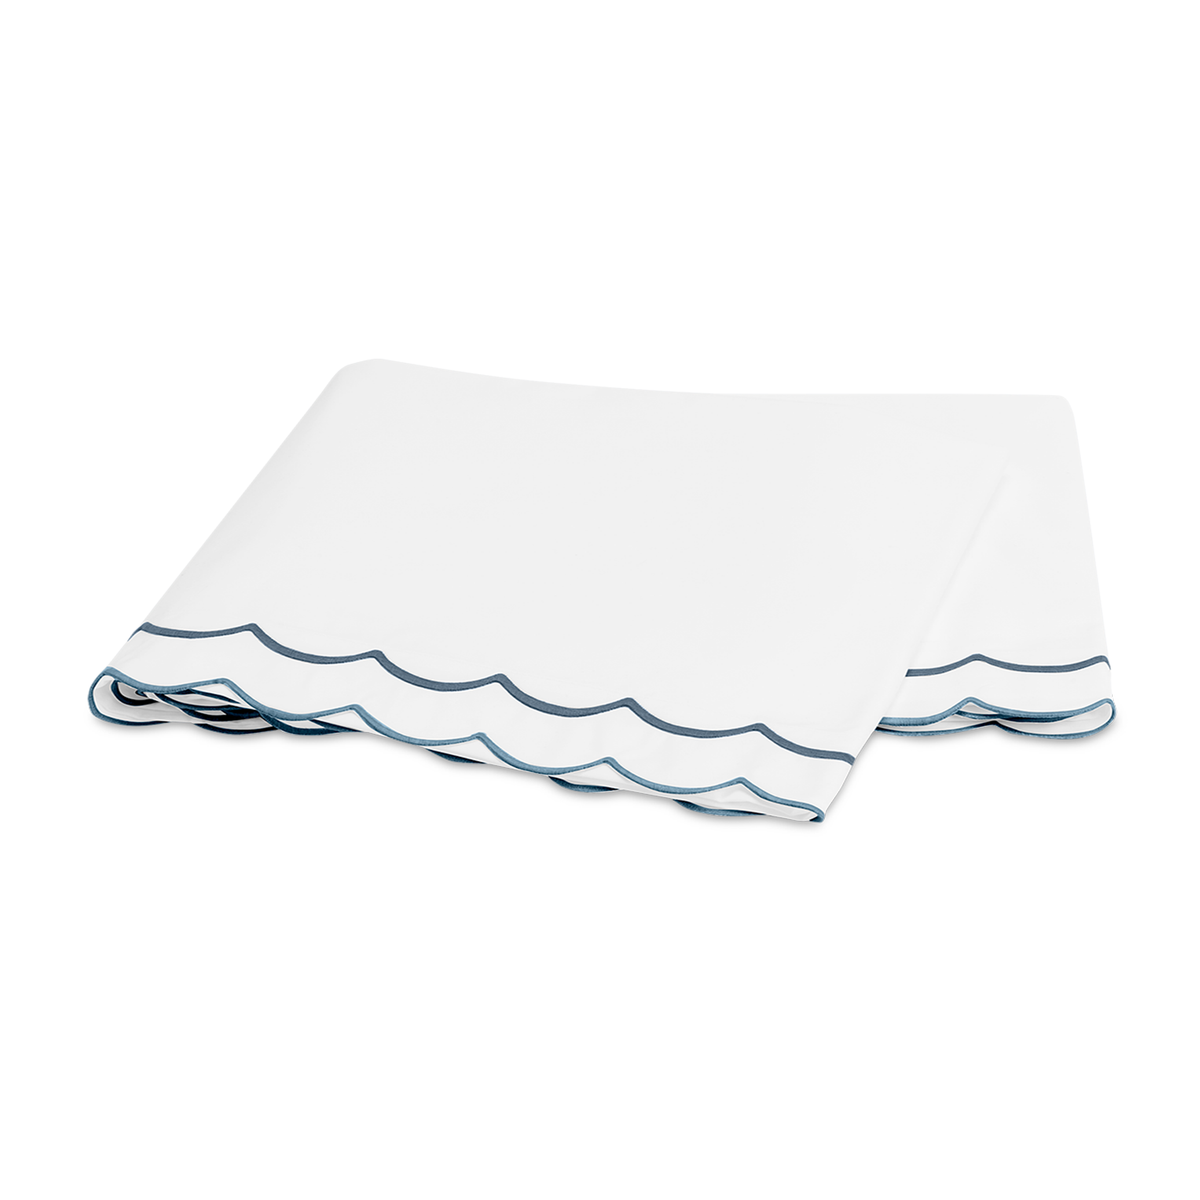 Flat Sheet of Matouk India Bedding in Hazy Blue Color